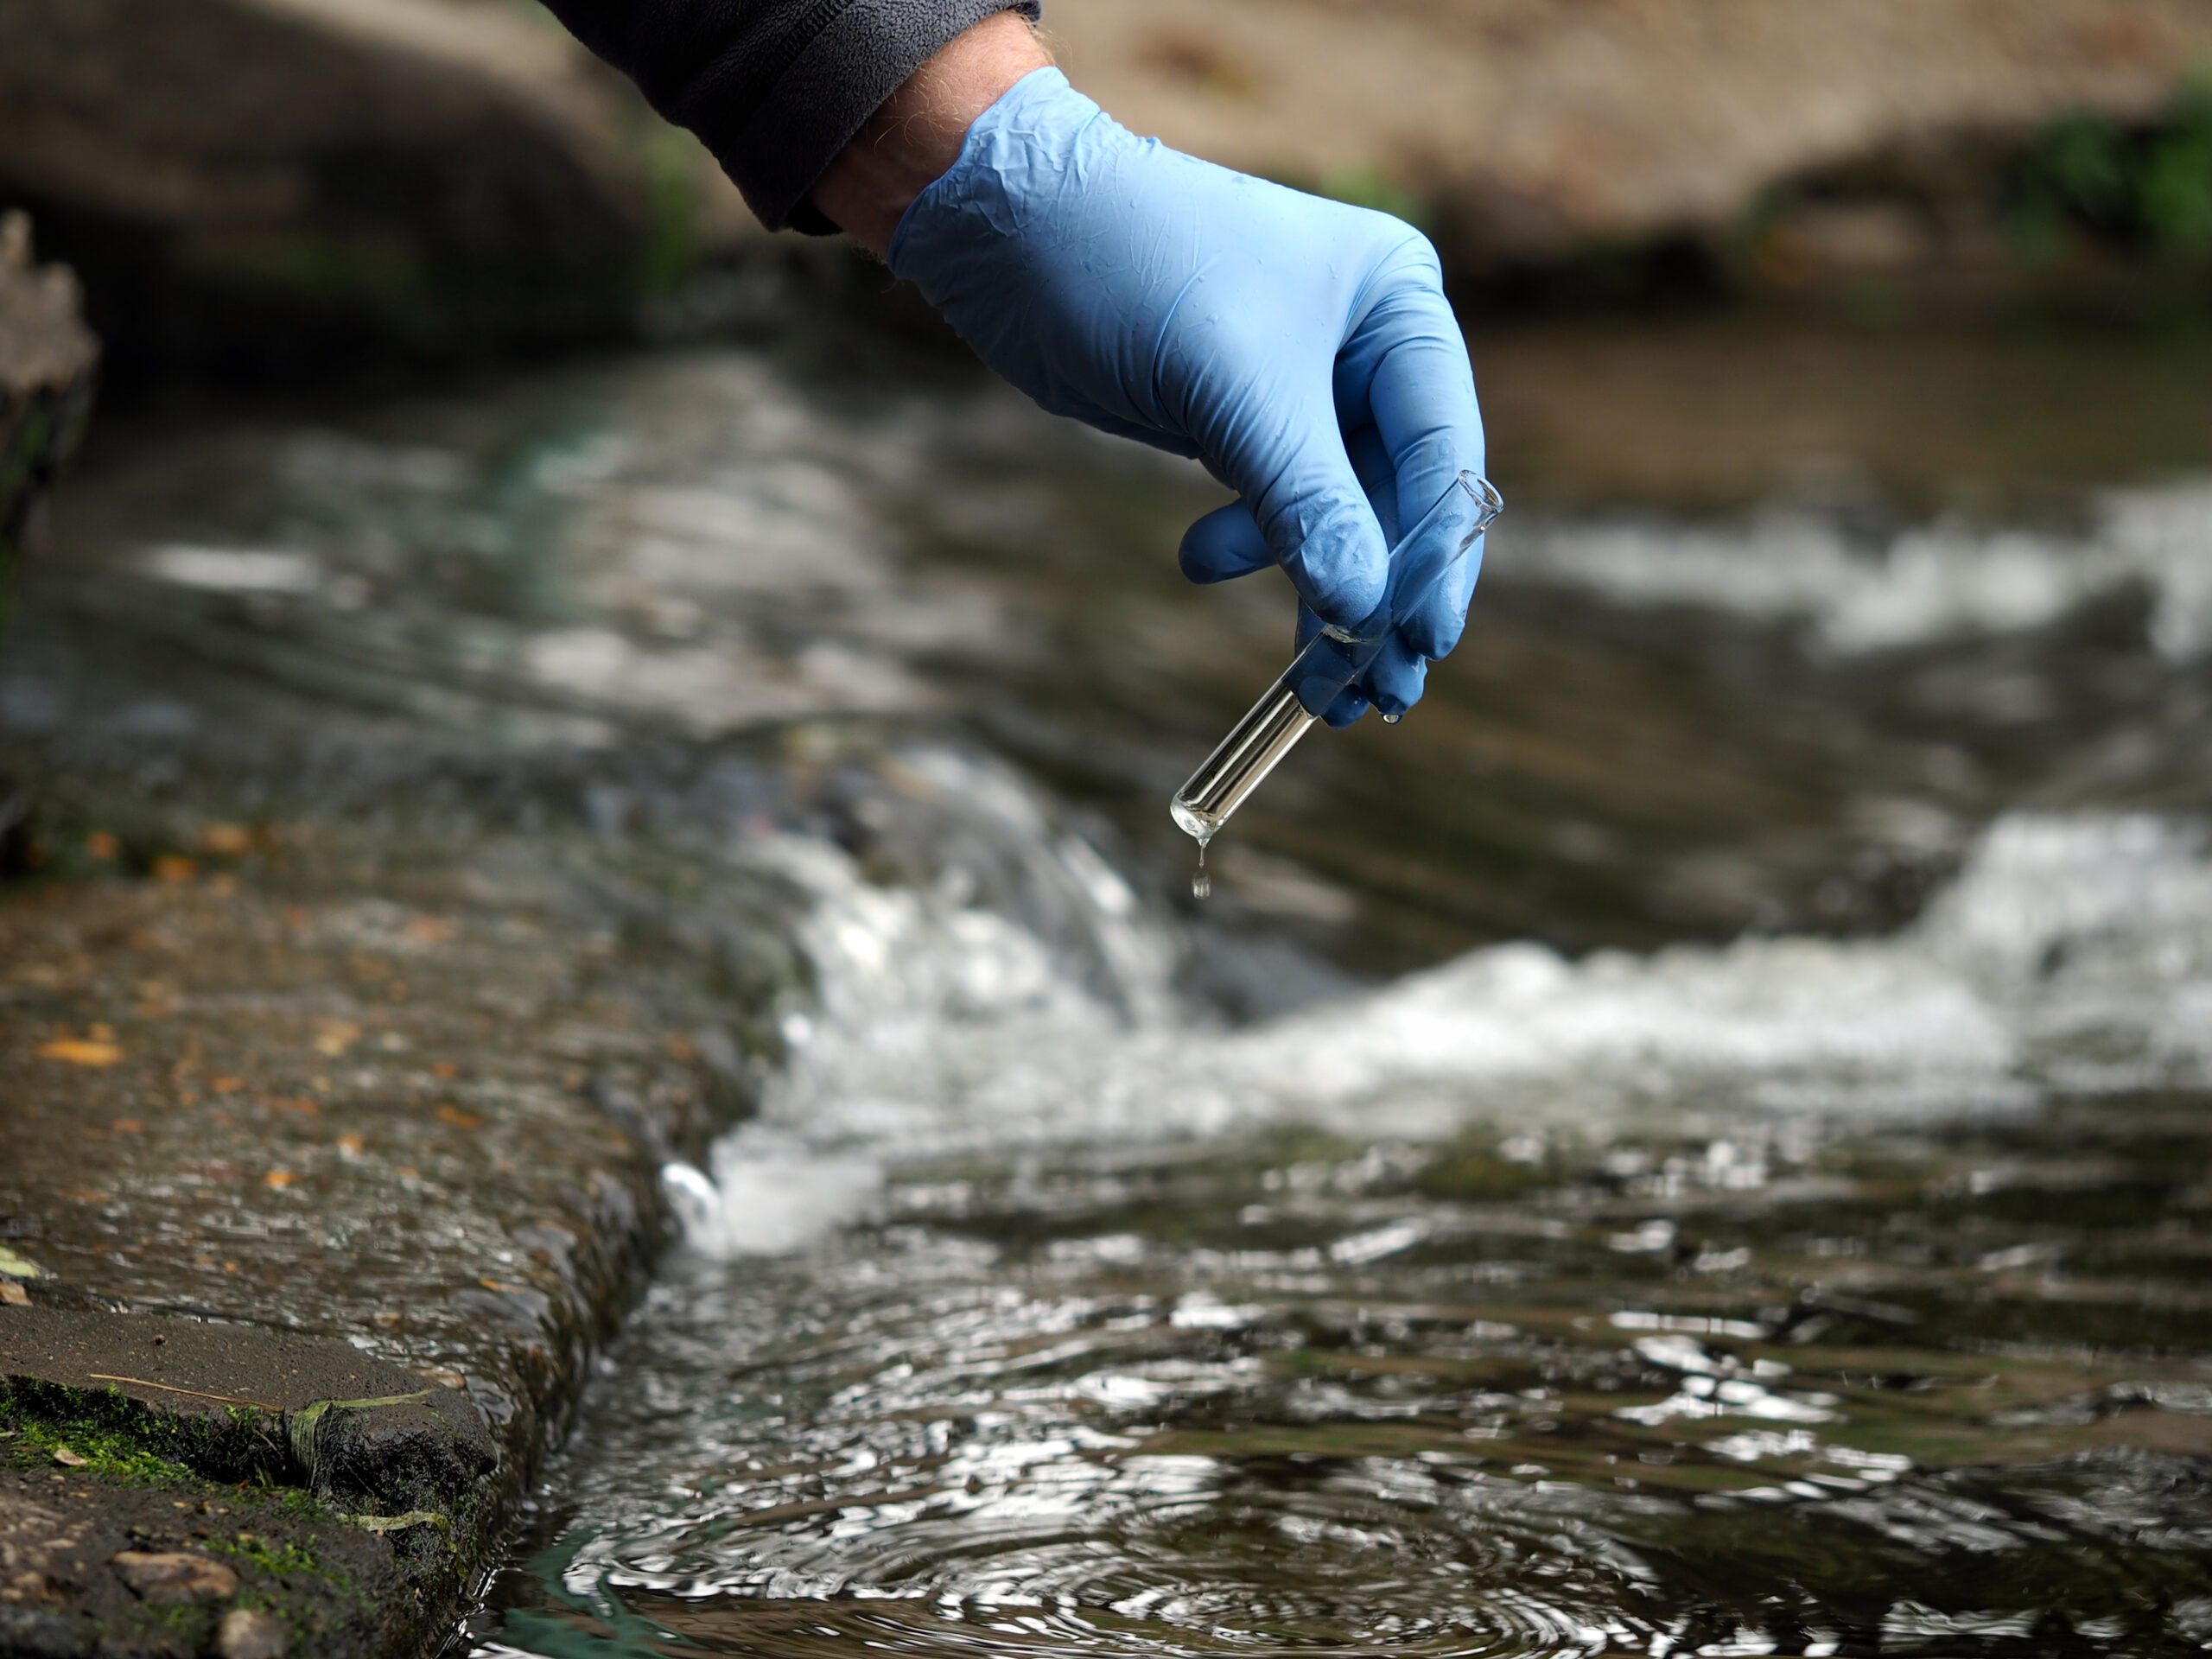 Local Health Officials Use Dna Testing To Pinpoint Sources Of Water Pollution Ct Examiner